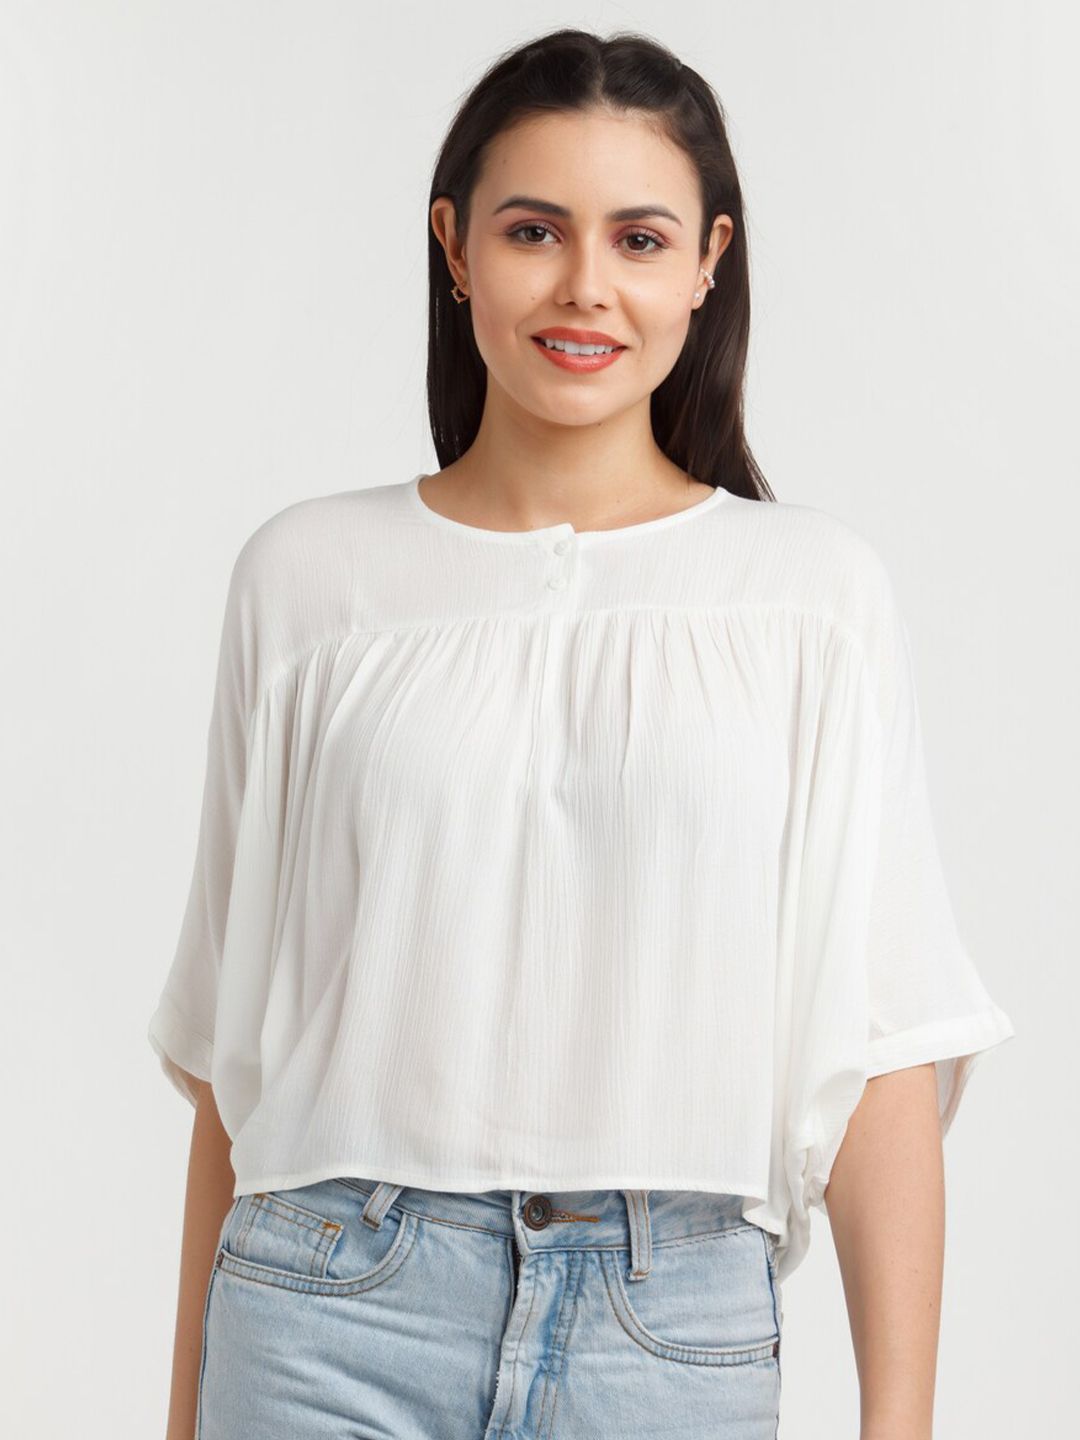 Zink London White Off-Shoulder Top Price in India